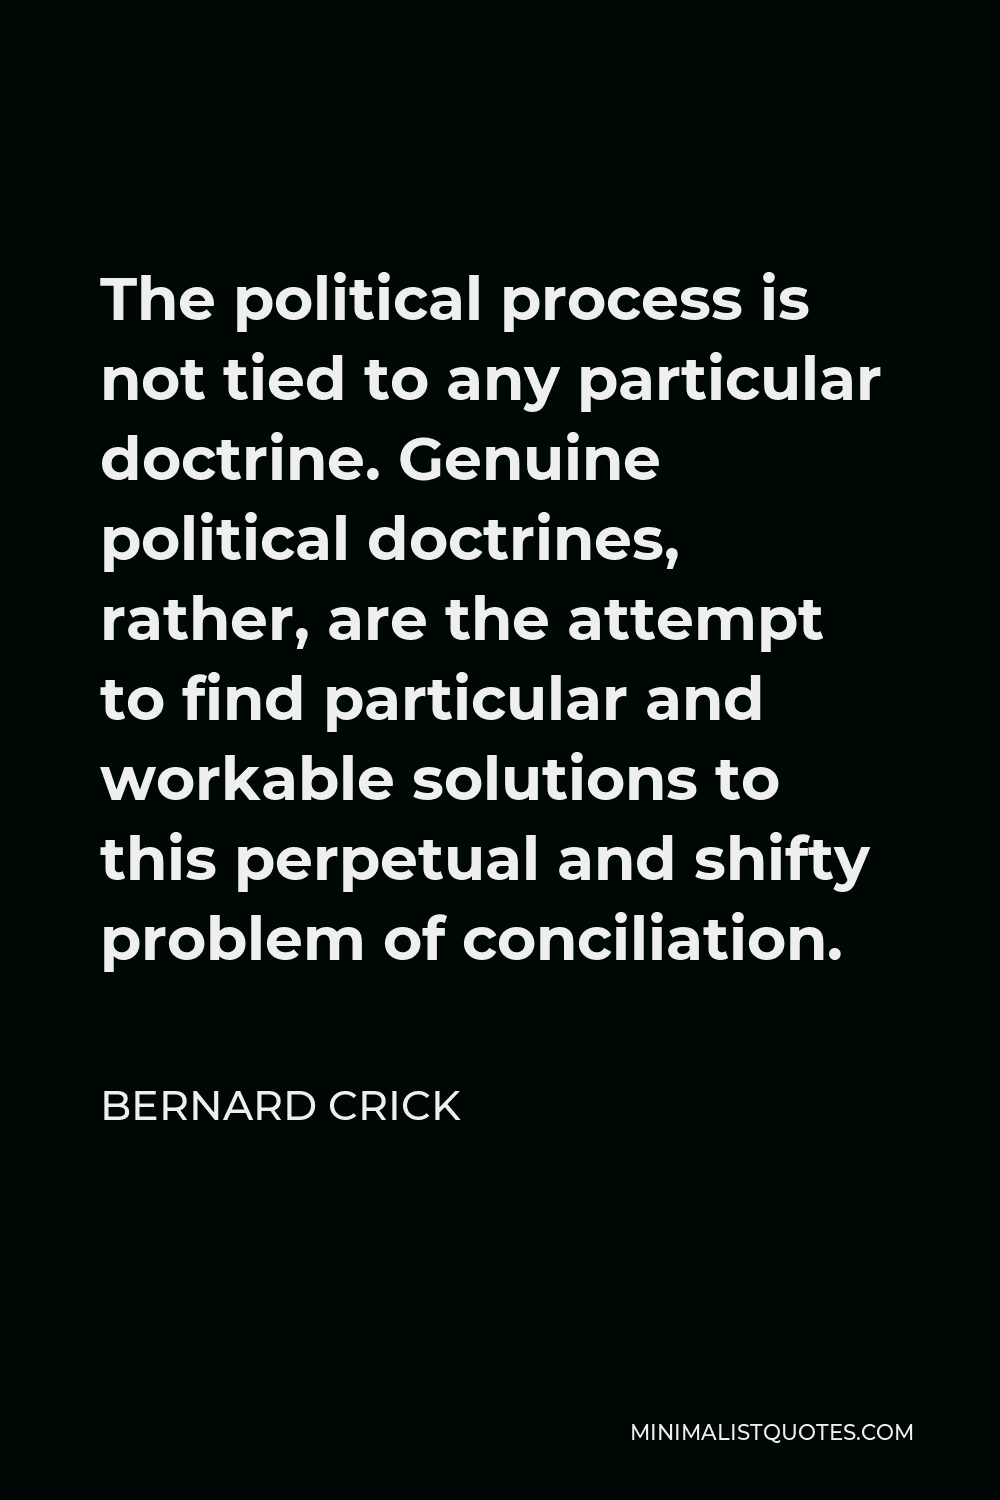 Bernard Crick Quote - The political process is not tied to any particular doctrine. Genuine political doctrines, rather, are the attempt to find particular and workable solutions to this perpetual and shifty problem of conciliation.